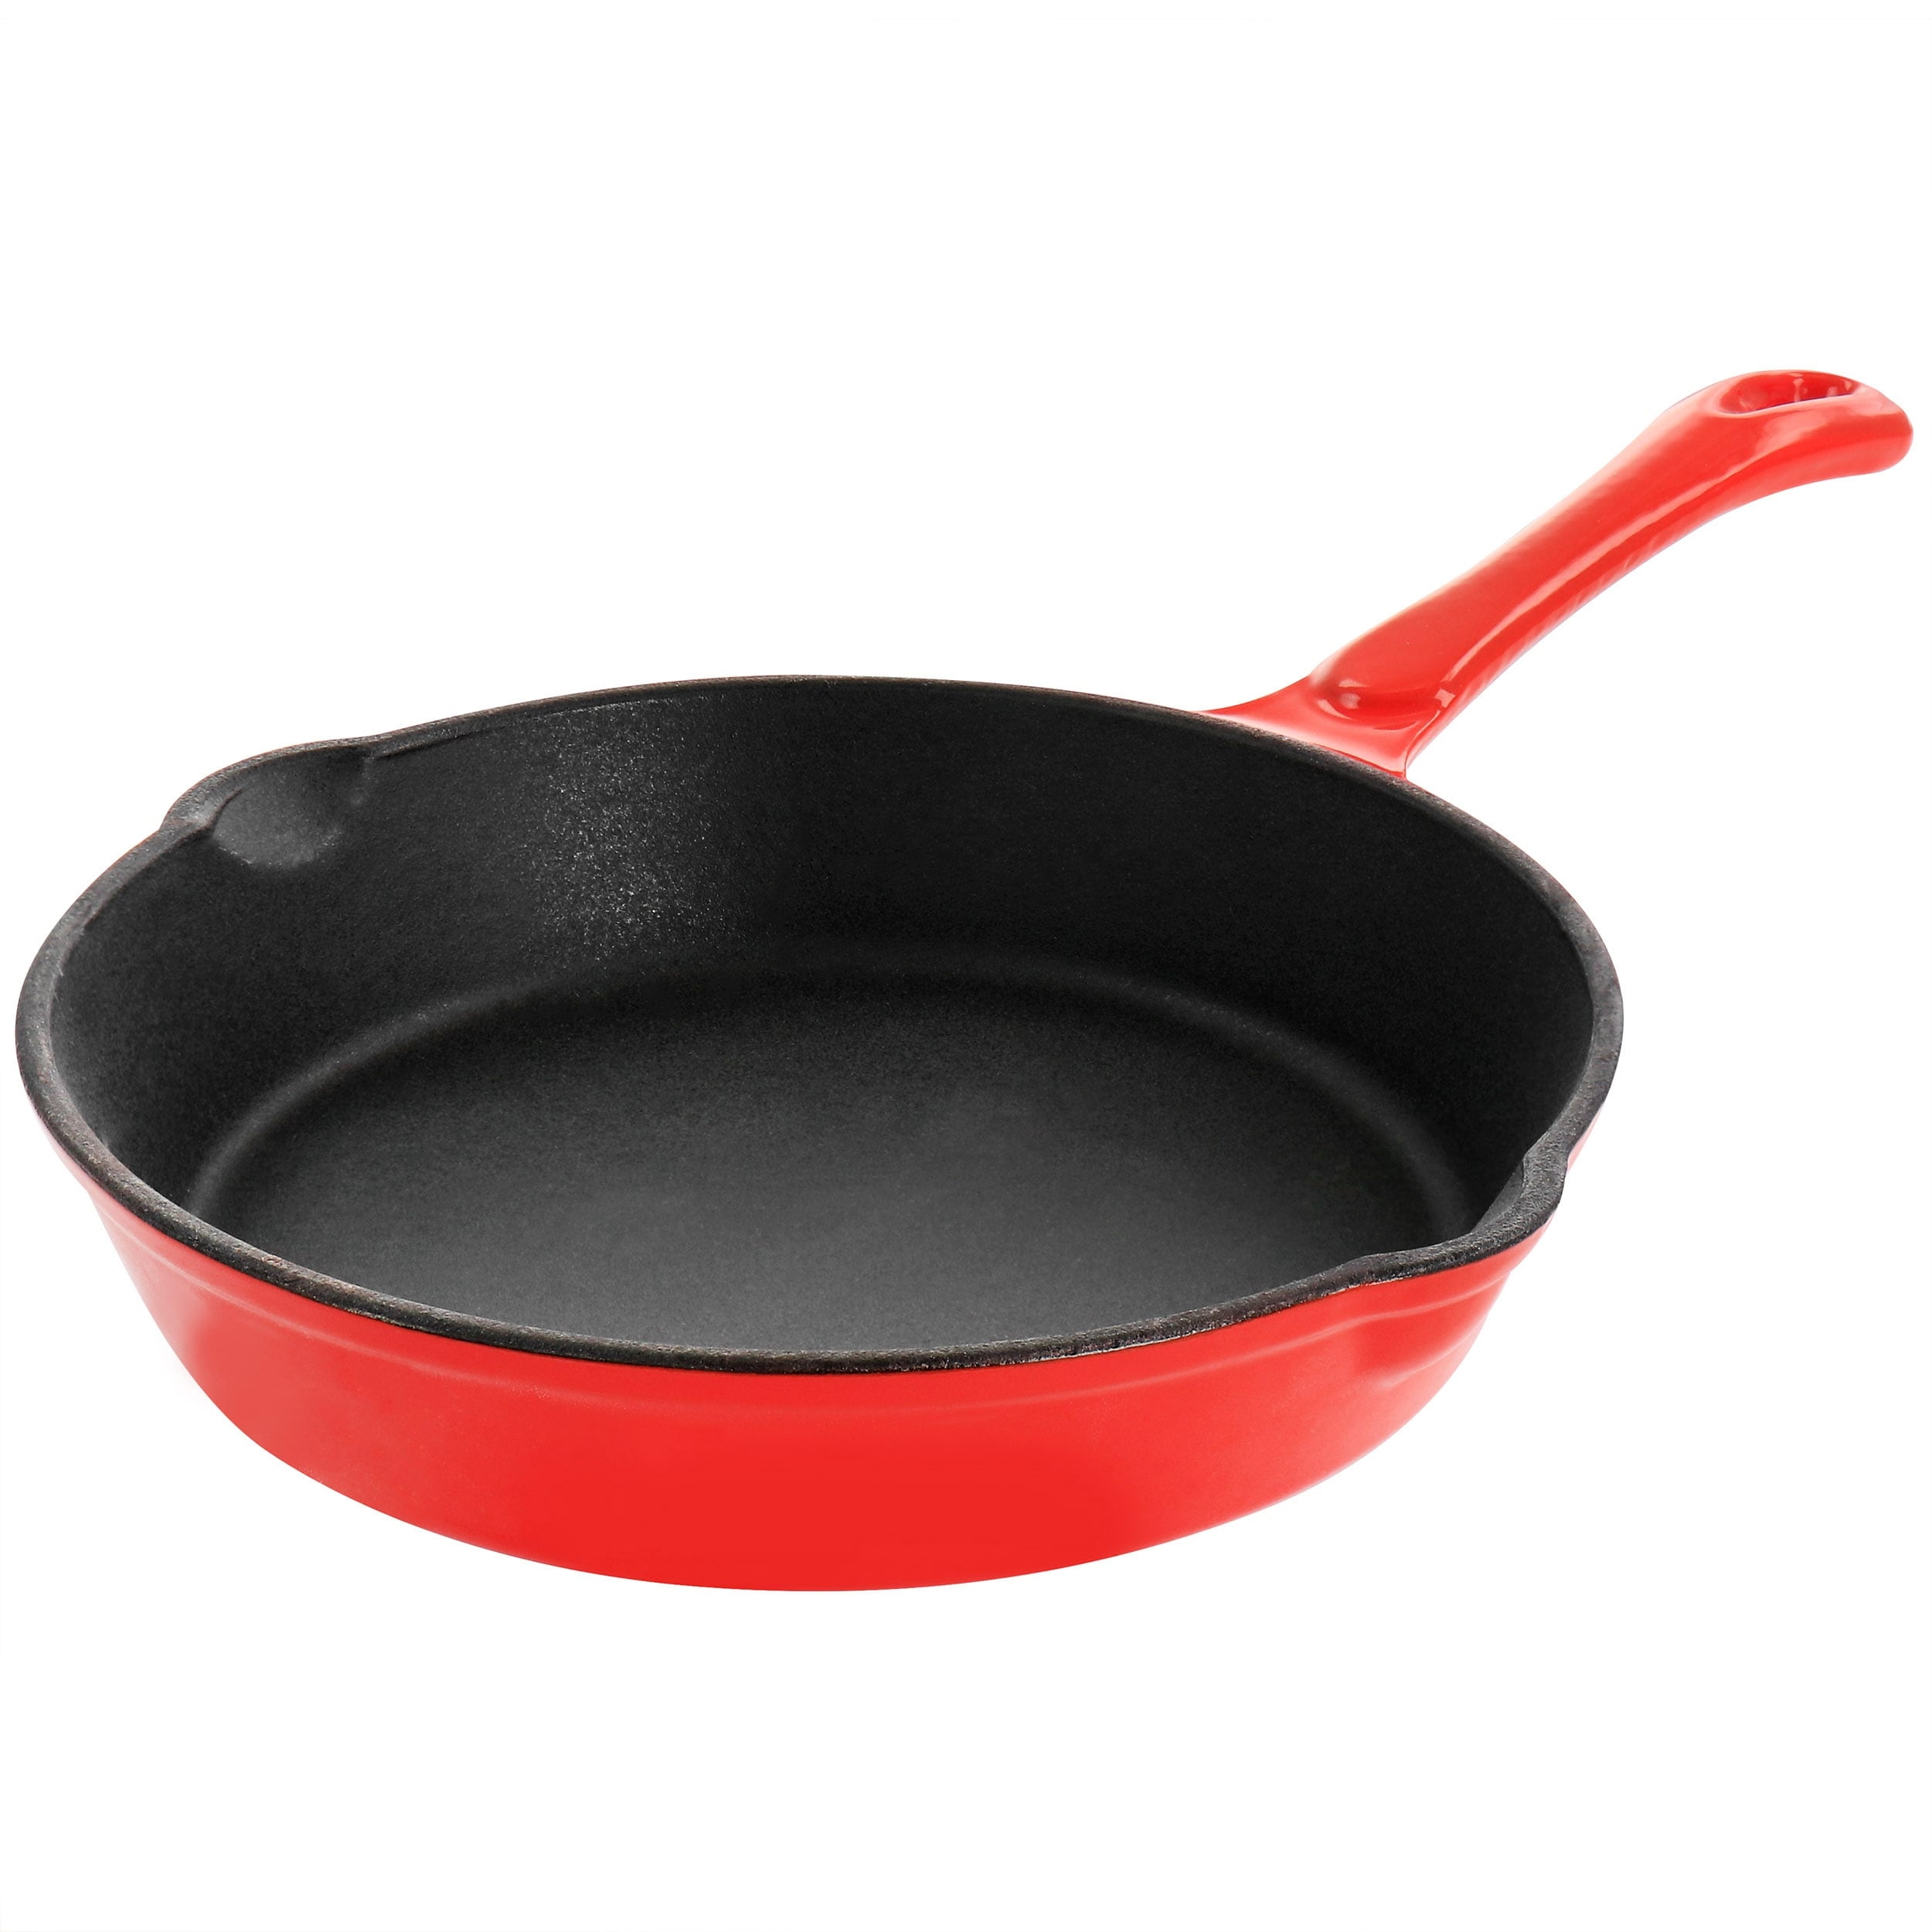 https://ak1.ostkcdn.com/images/products/is/images/direct/1dbc8515bbdb8a7611d9c3cee8af784bedce34d3/MegaChef-Enameled-Round-8-Inch-PreSeasoned-Cast-Iron-Frying-Pan-in-Red.jpg